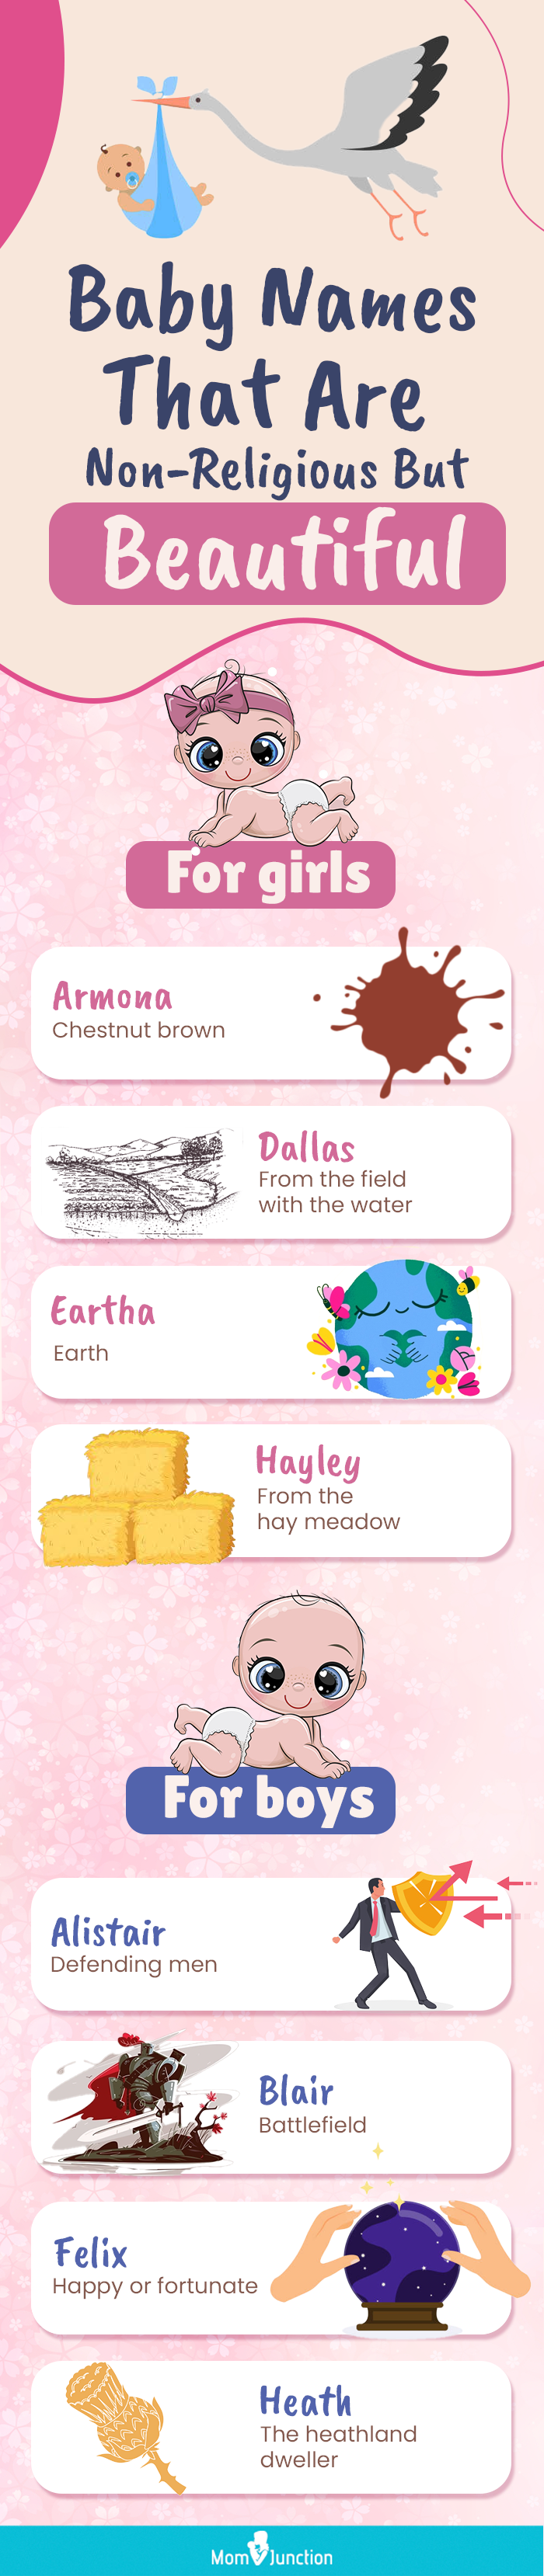 baby names that are non relegious final (infographic)